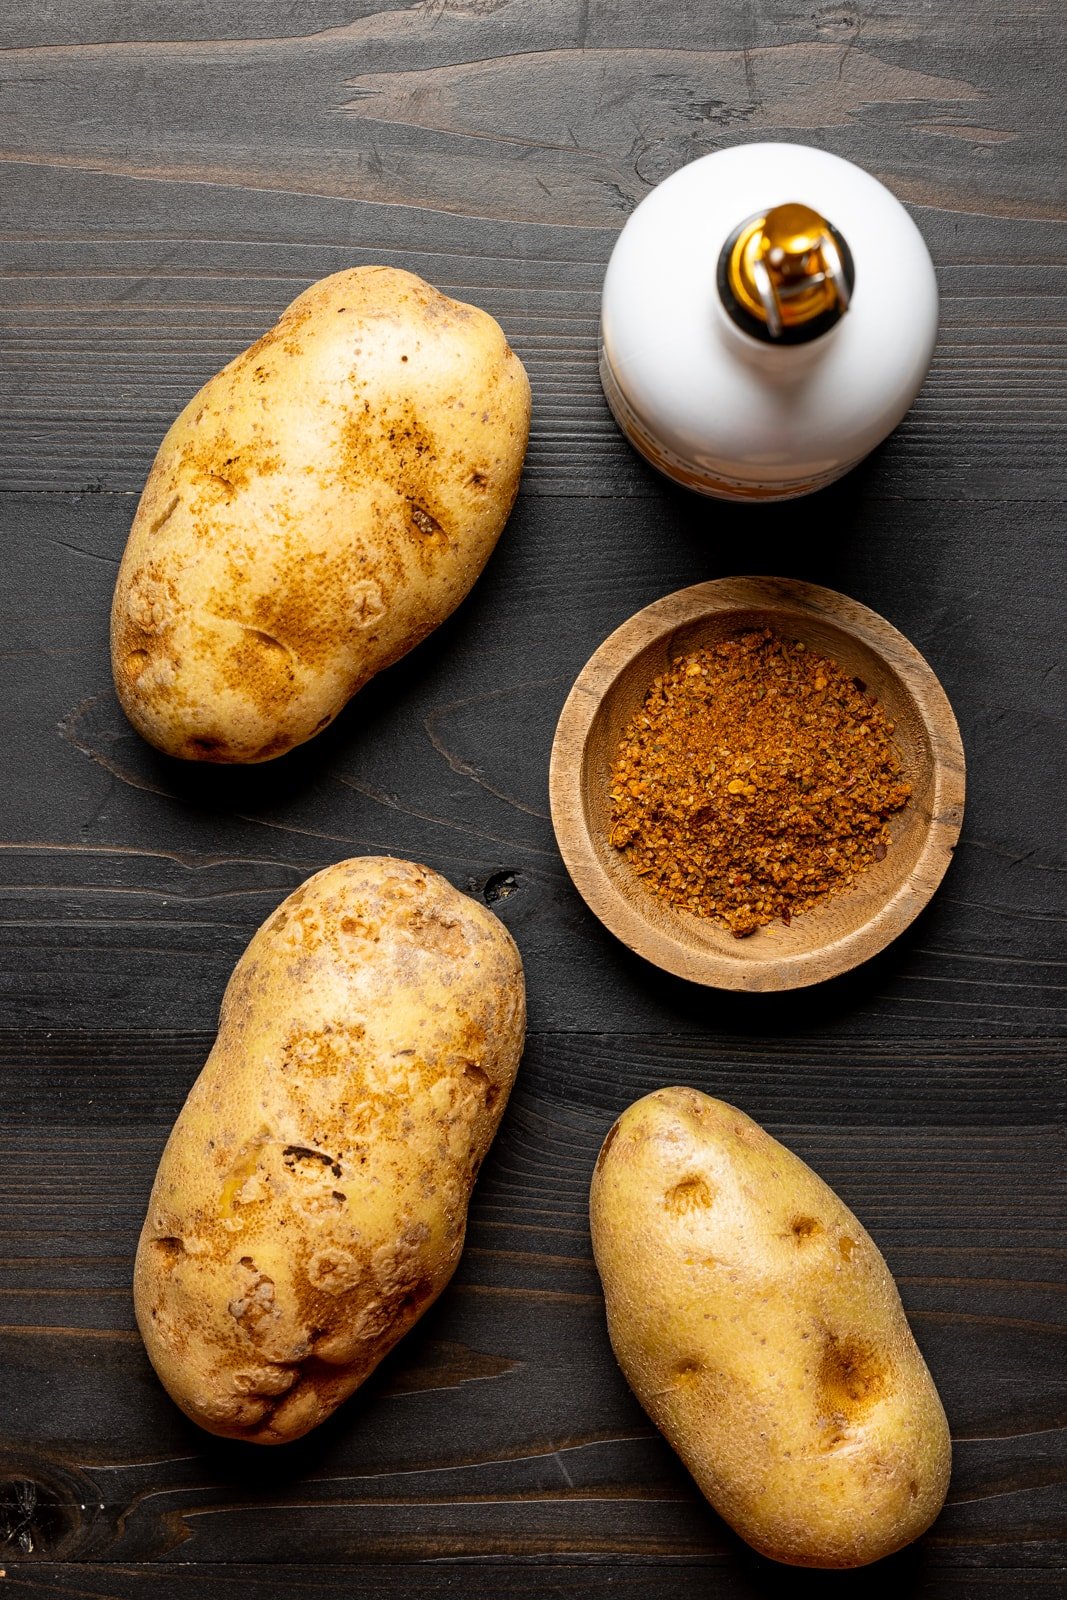 3 large russet potatoes on a black wood table with cajun seasoning, and a bottle of olive oil.